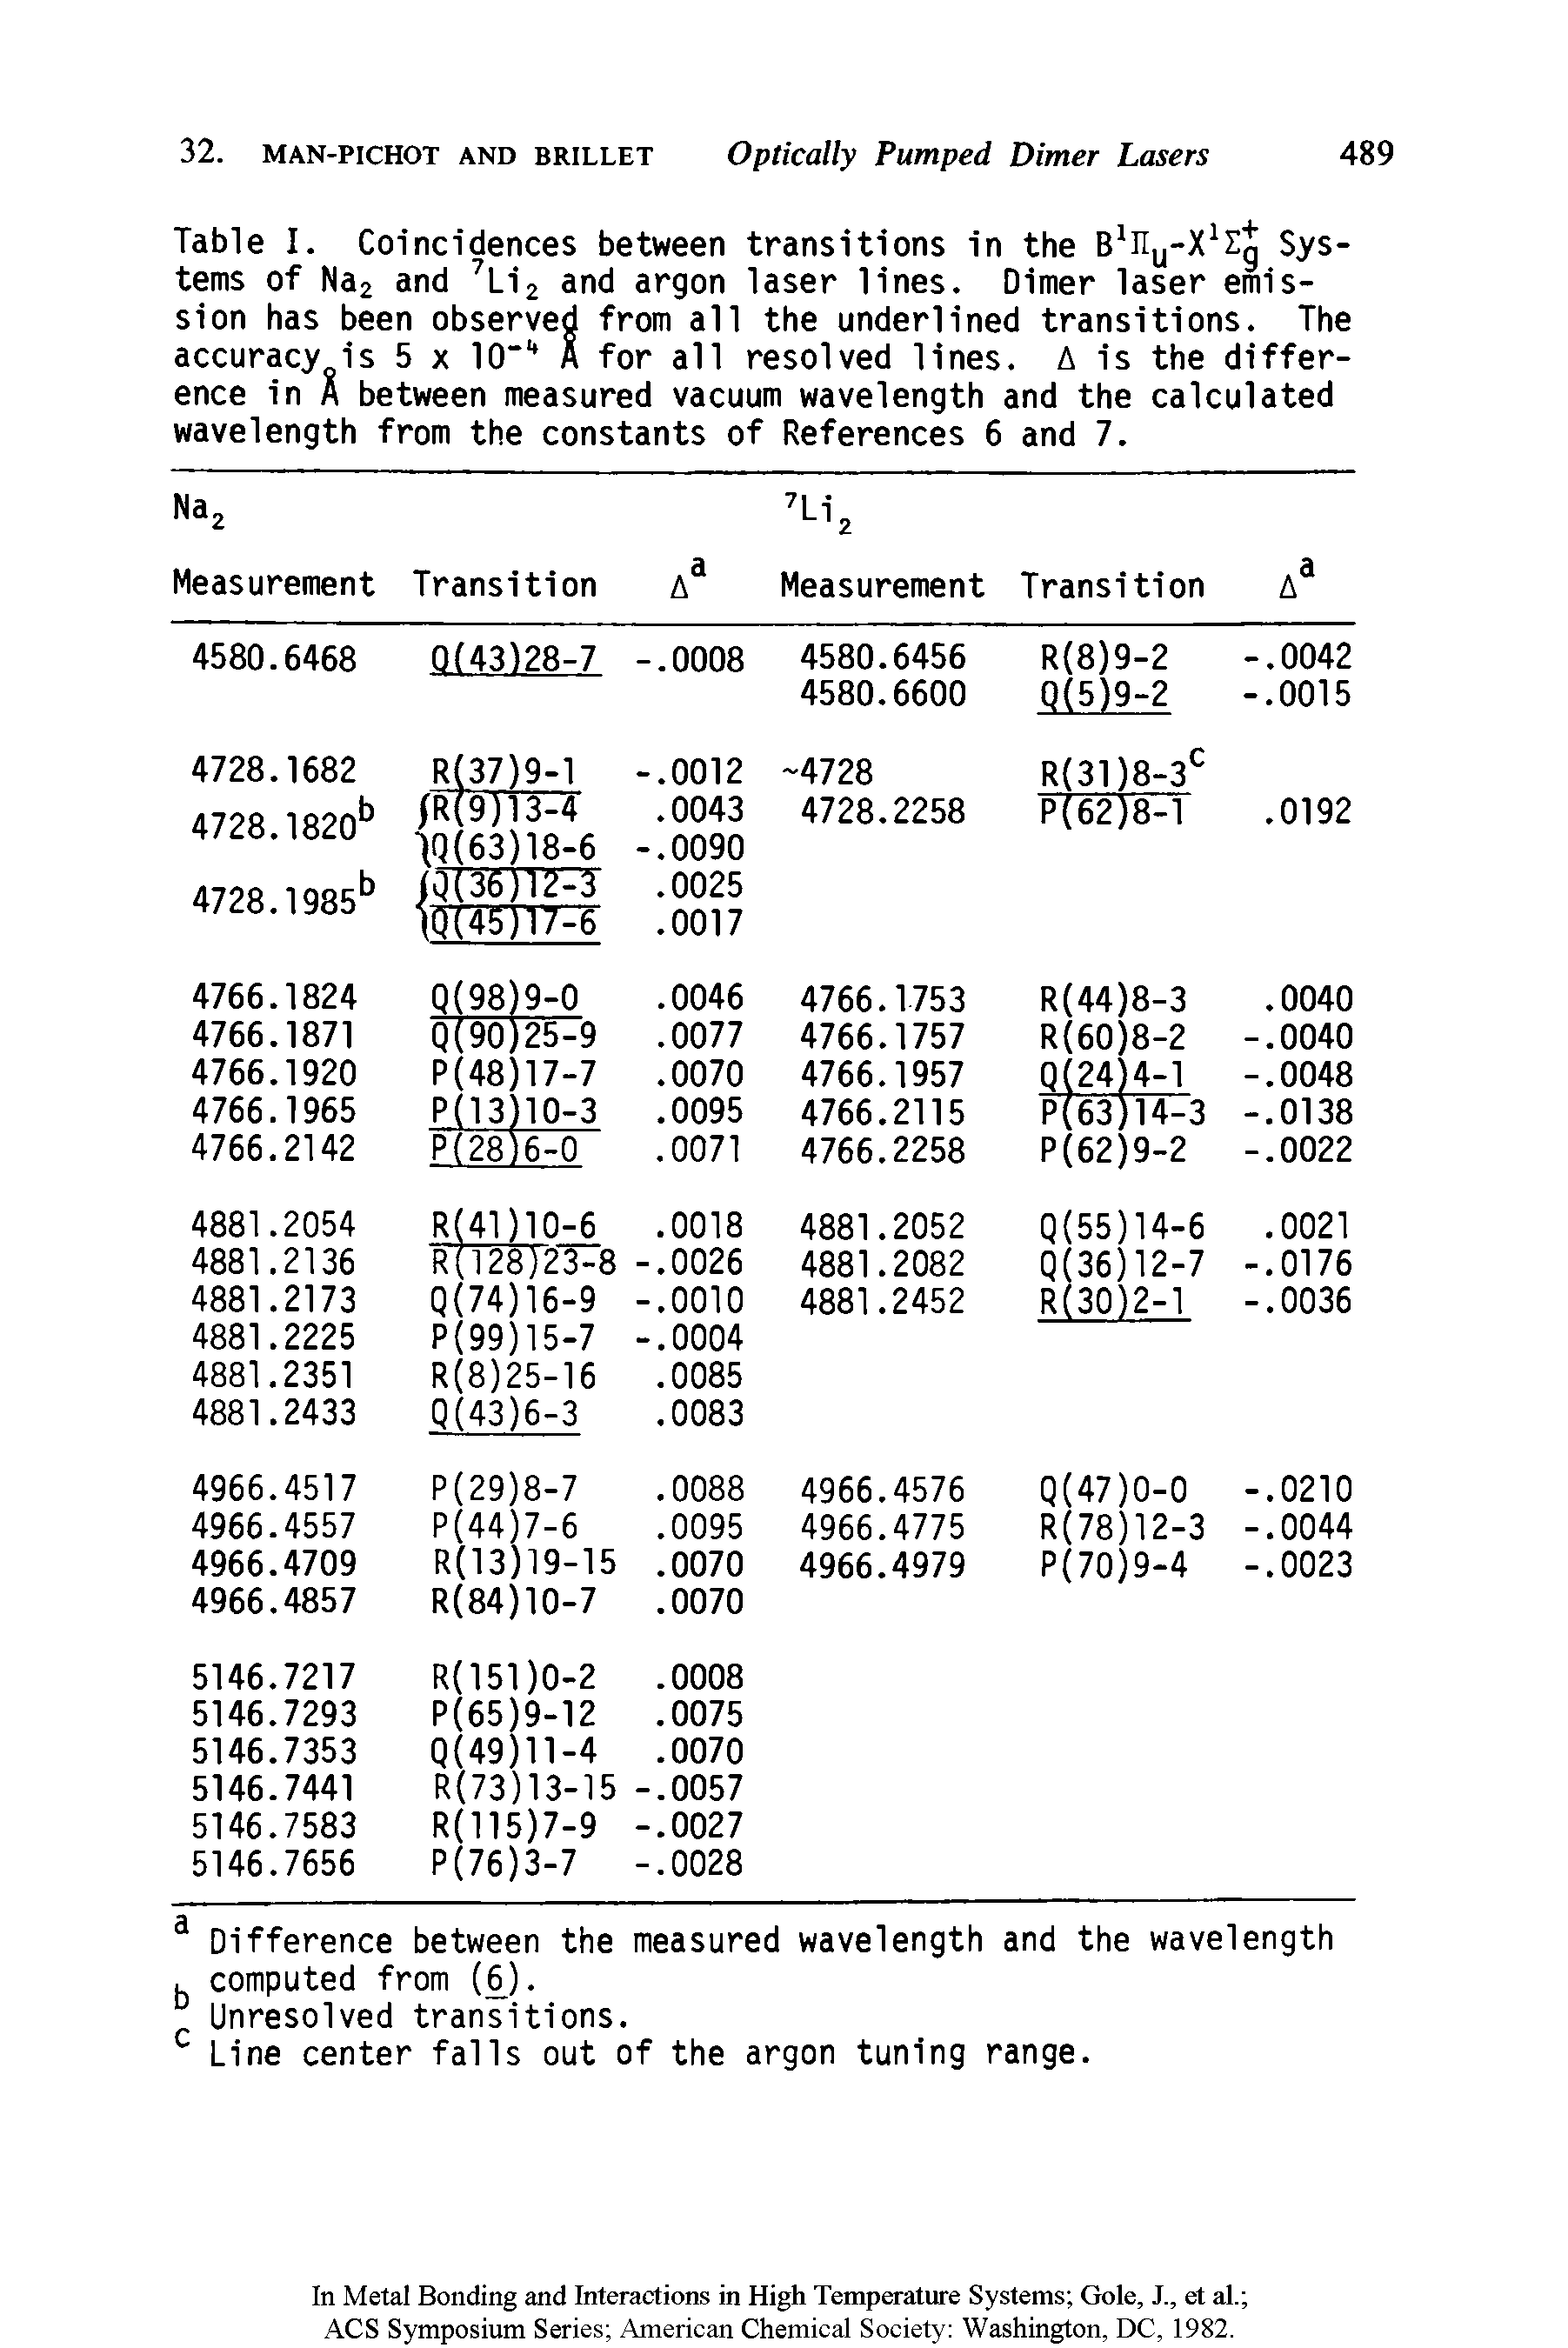 Table I. Coincidences between transitions in the B liy-X Tg Systems of Na2 and Li2 and argon laser lines. Dimer laser emission has been observed from all the underlined transitions. The accuracy is 5 x lO" A for all resolved lines. A is the difference in A between measured vacuum wavelength and the calculated wavelength from the constants of References 6 and 7.